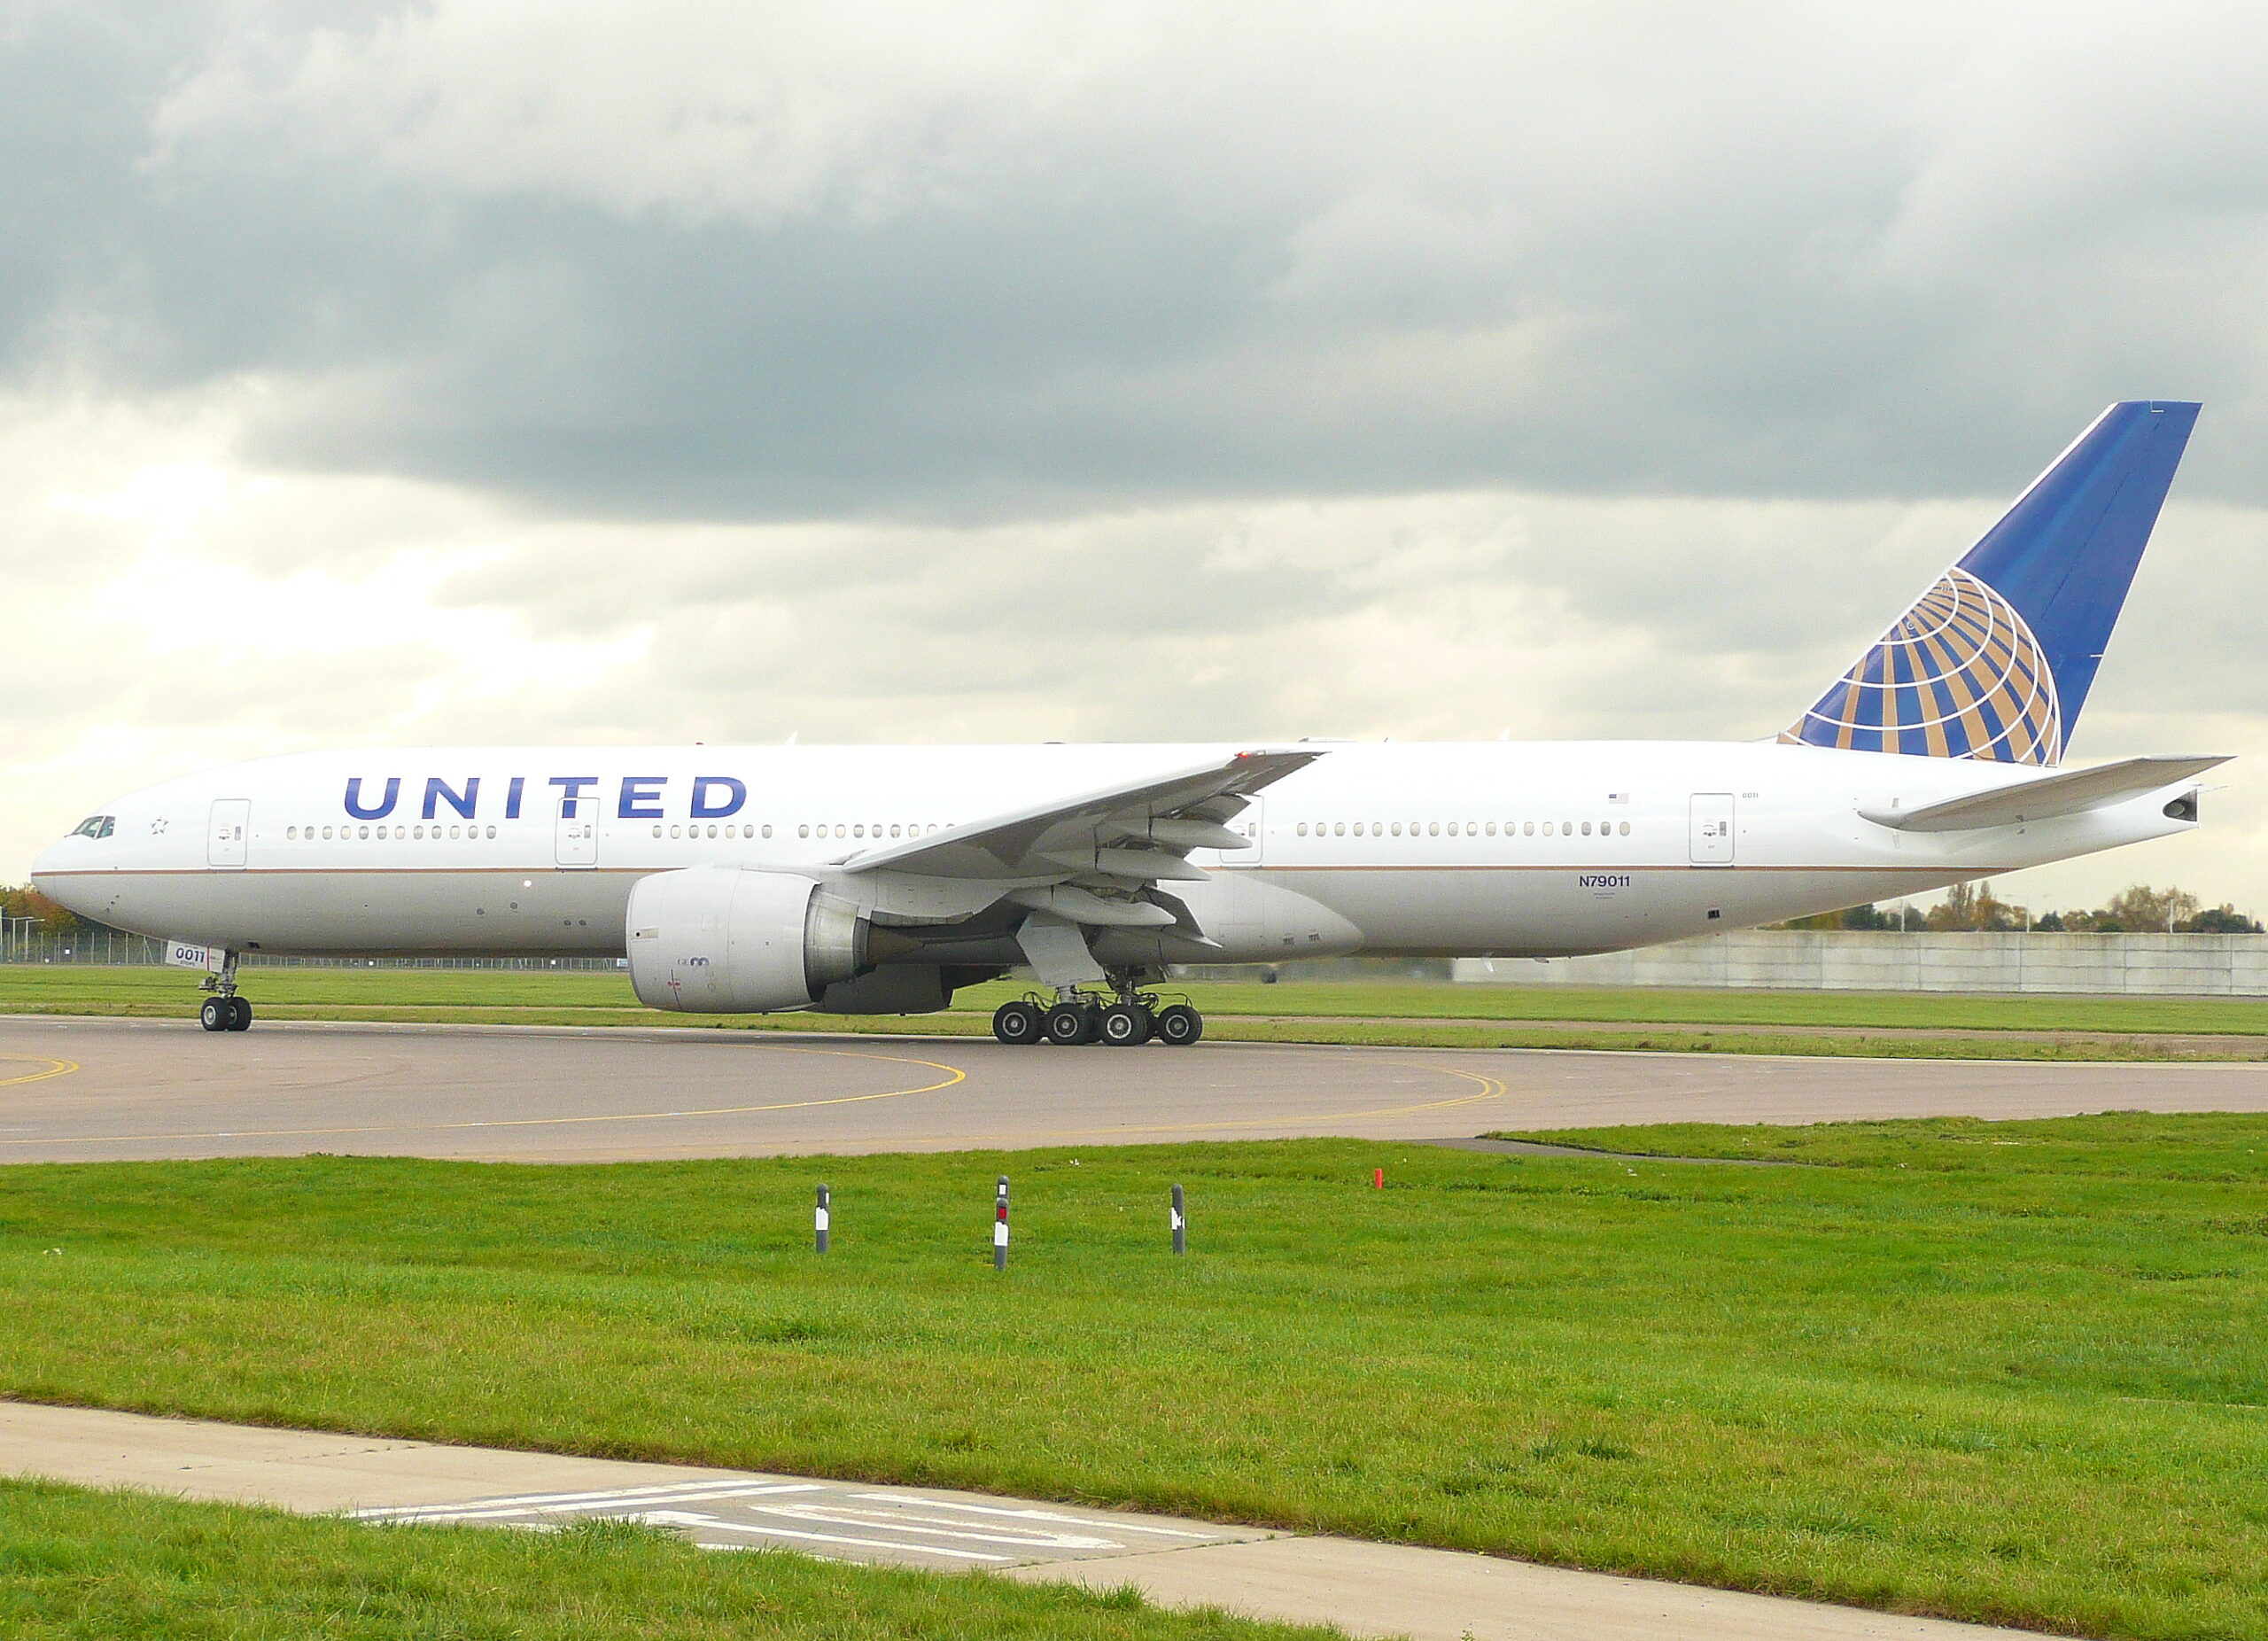 A United Airlines Boeing 777 on the taxiway.